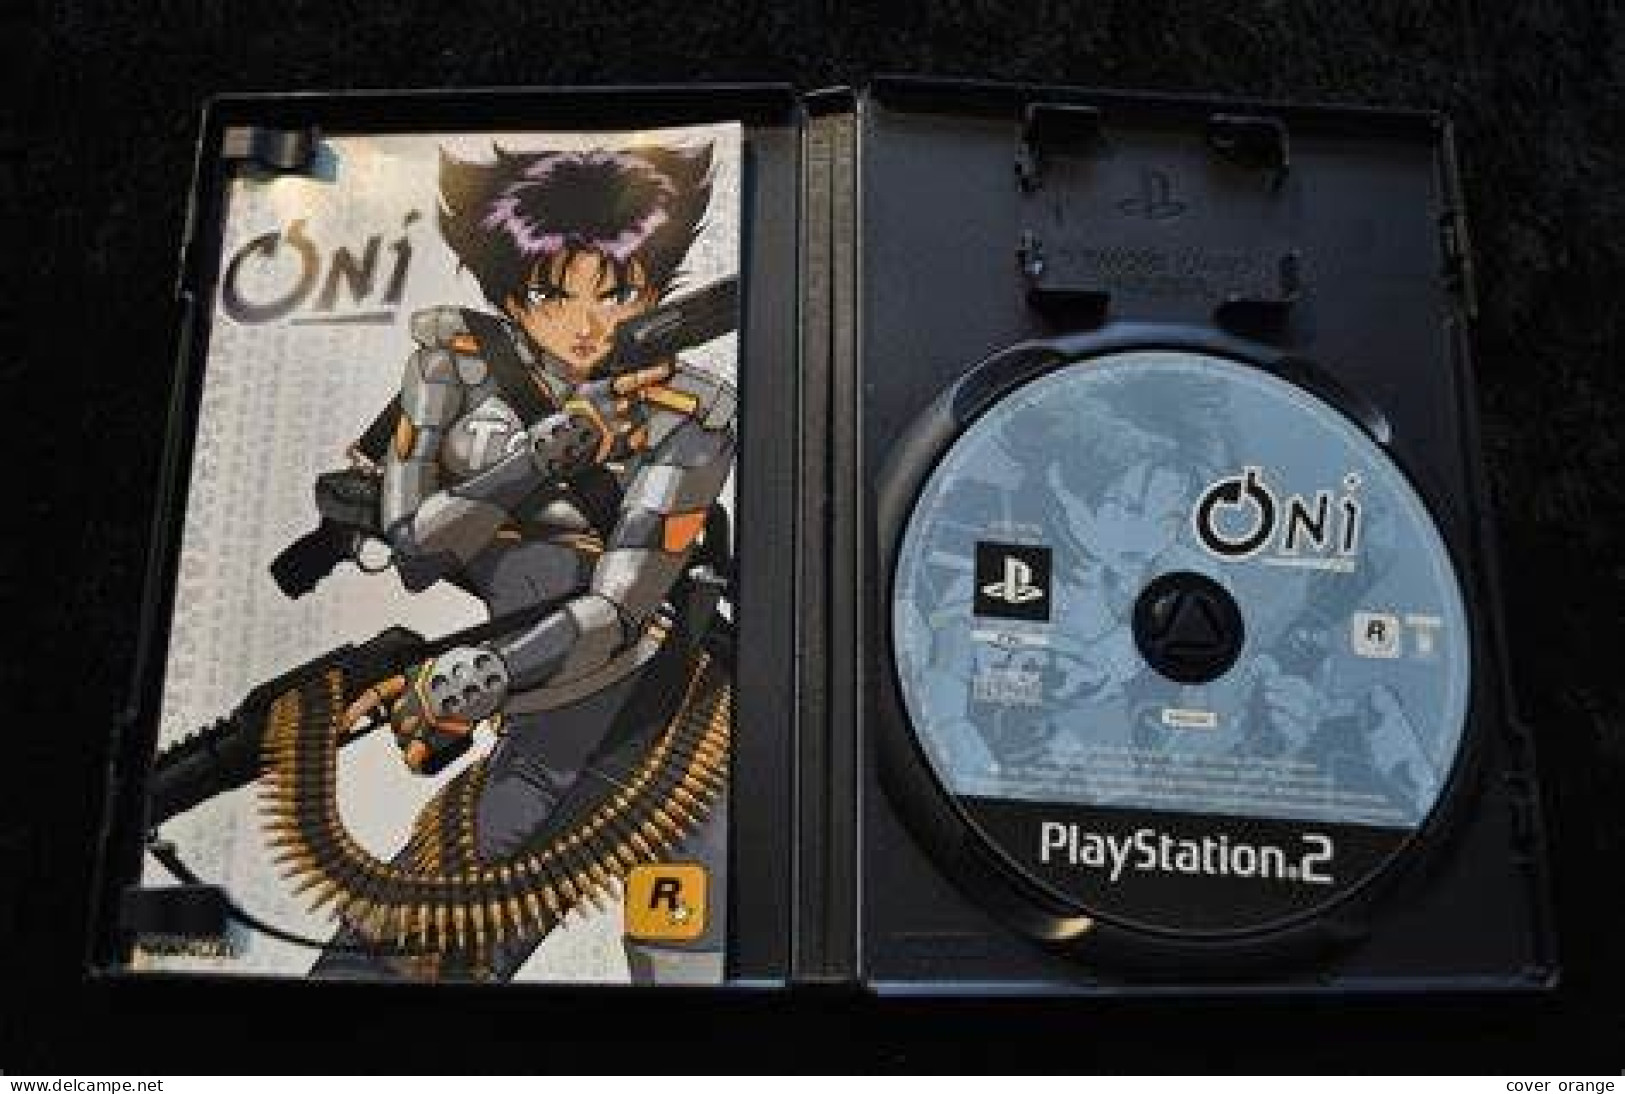 ONI PS2 - Playstation 2